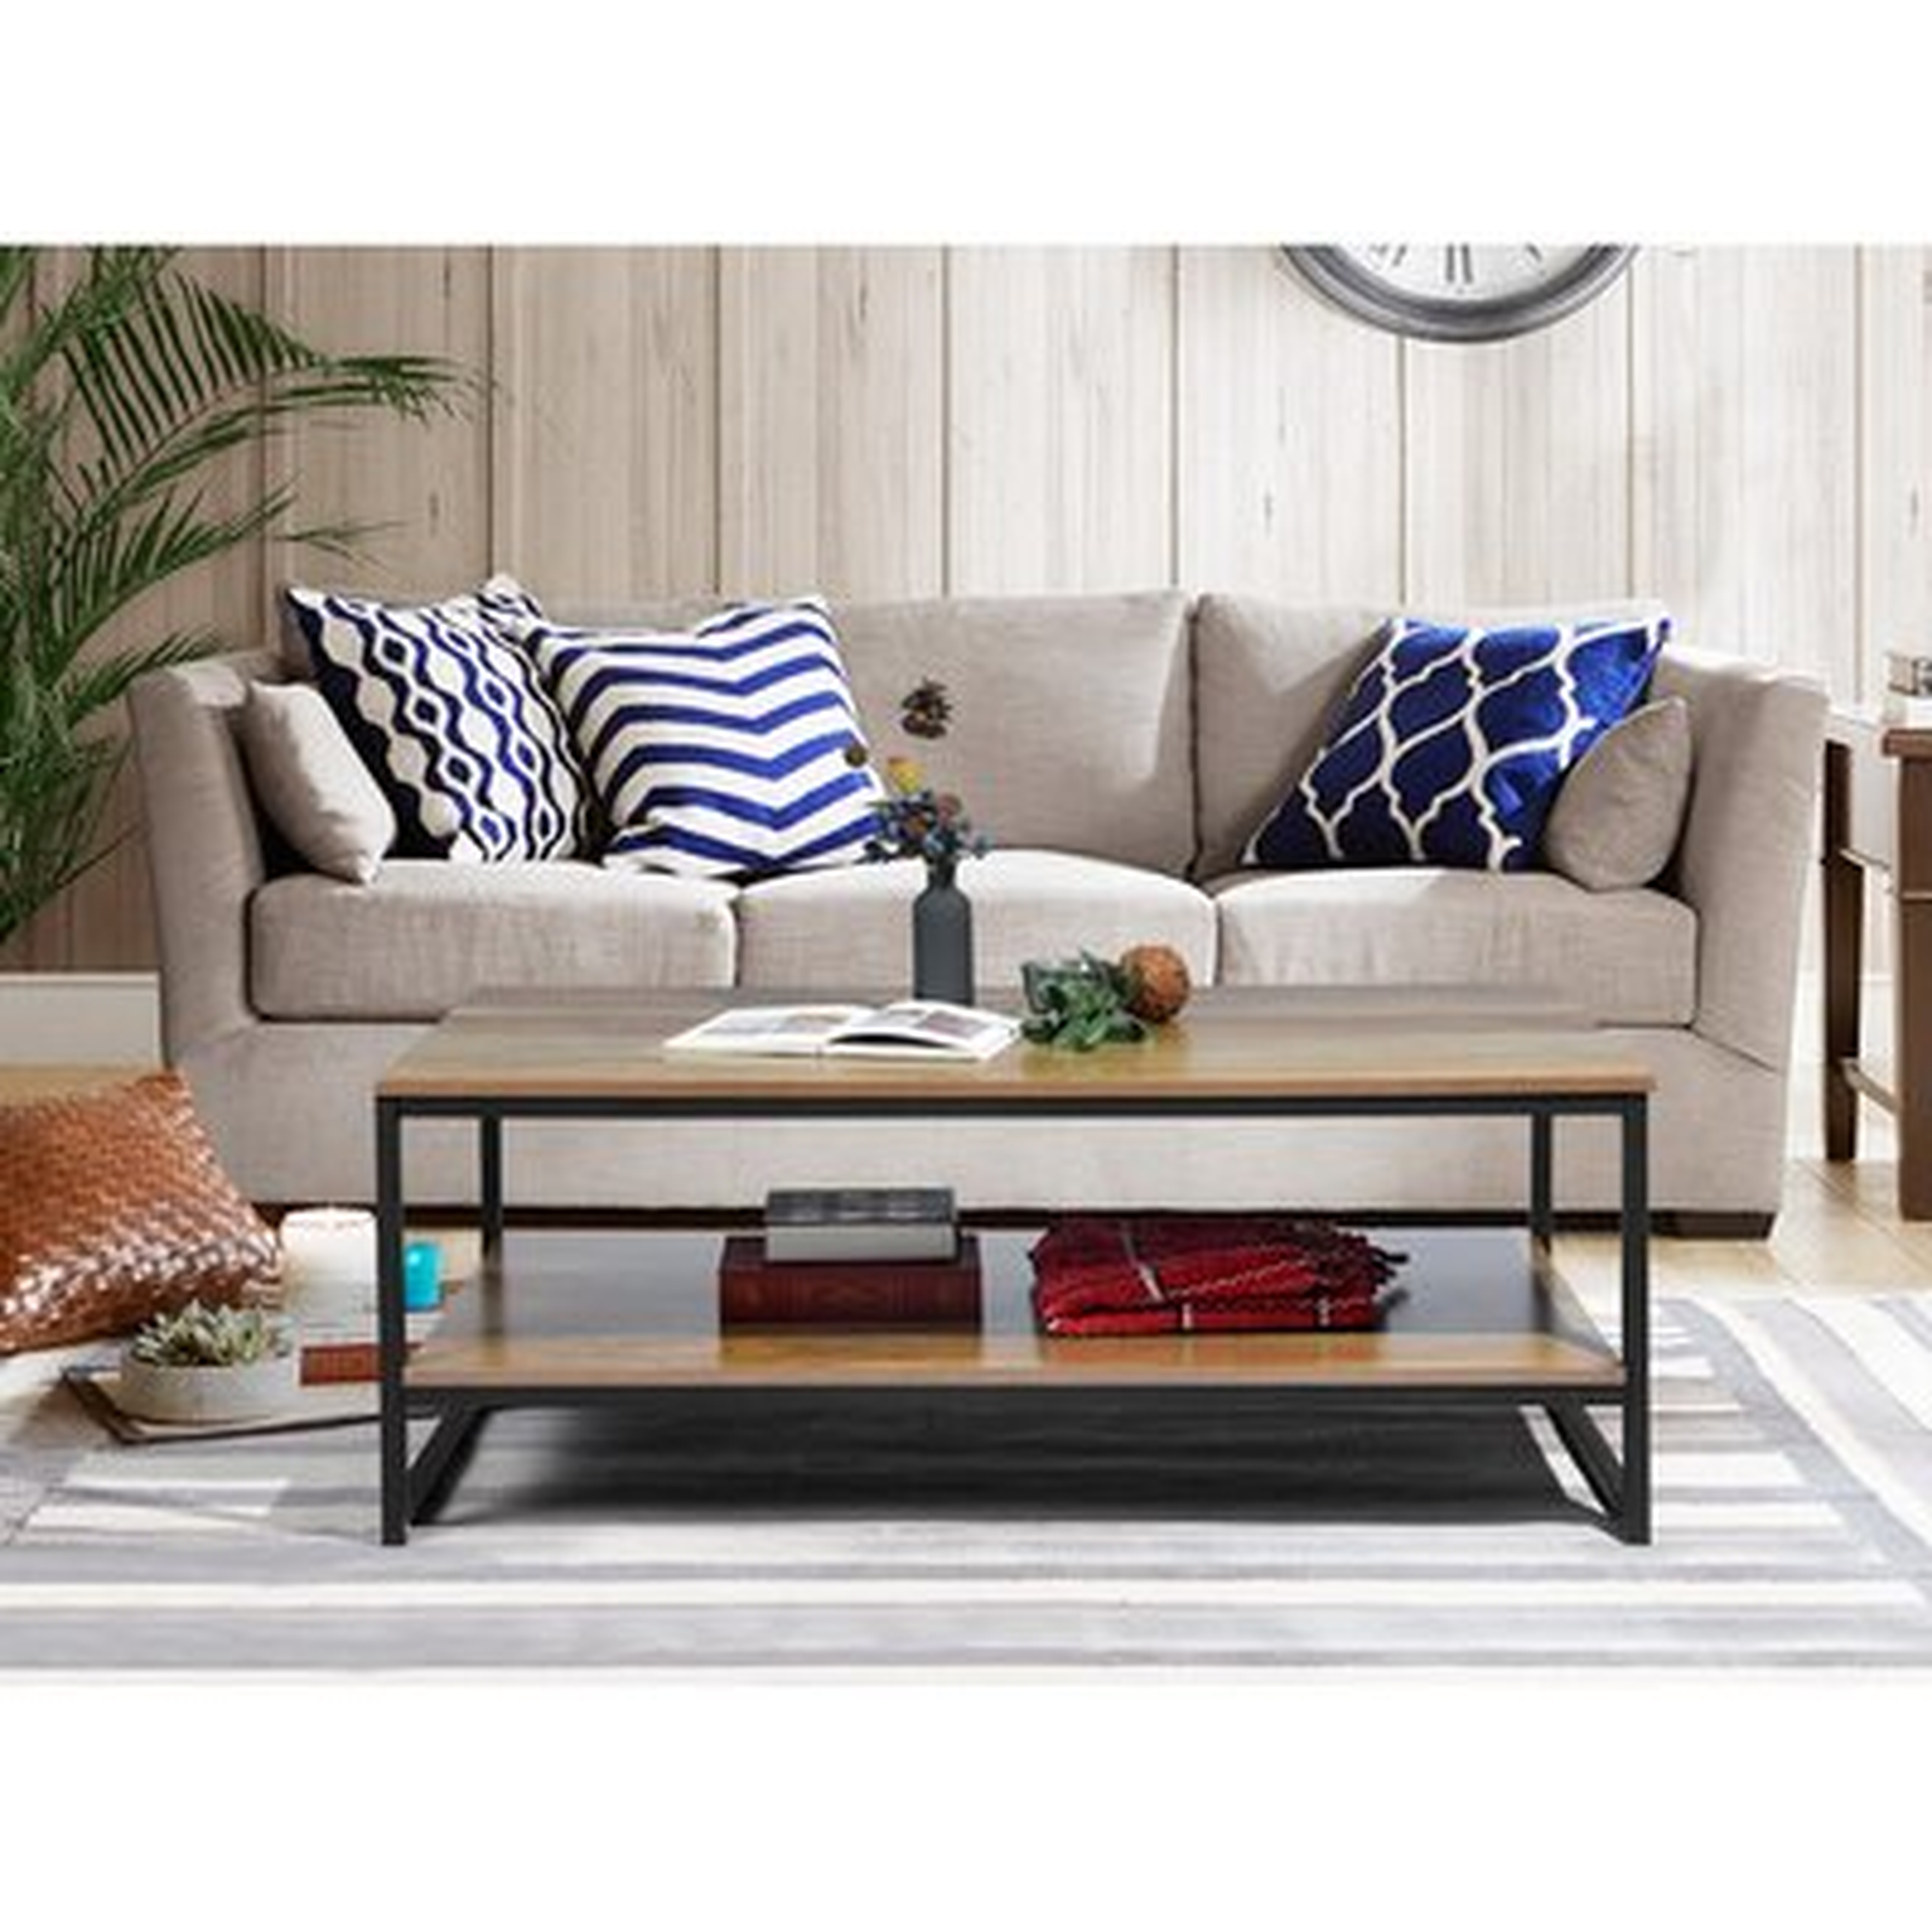 Christianne Sled Coffee Table with Storage - Wayfair